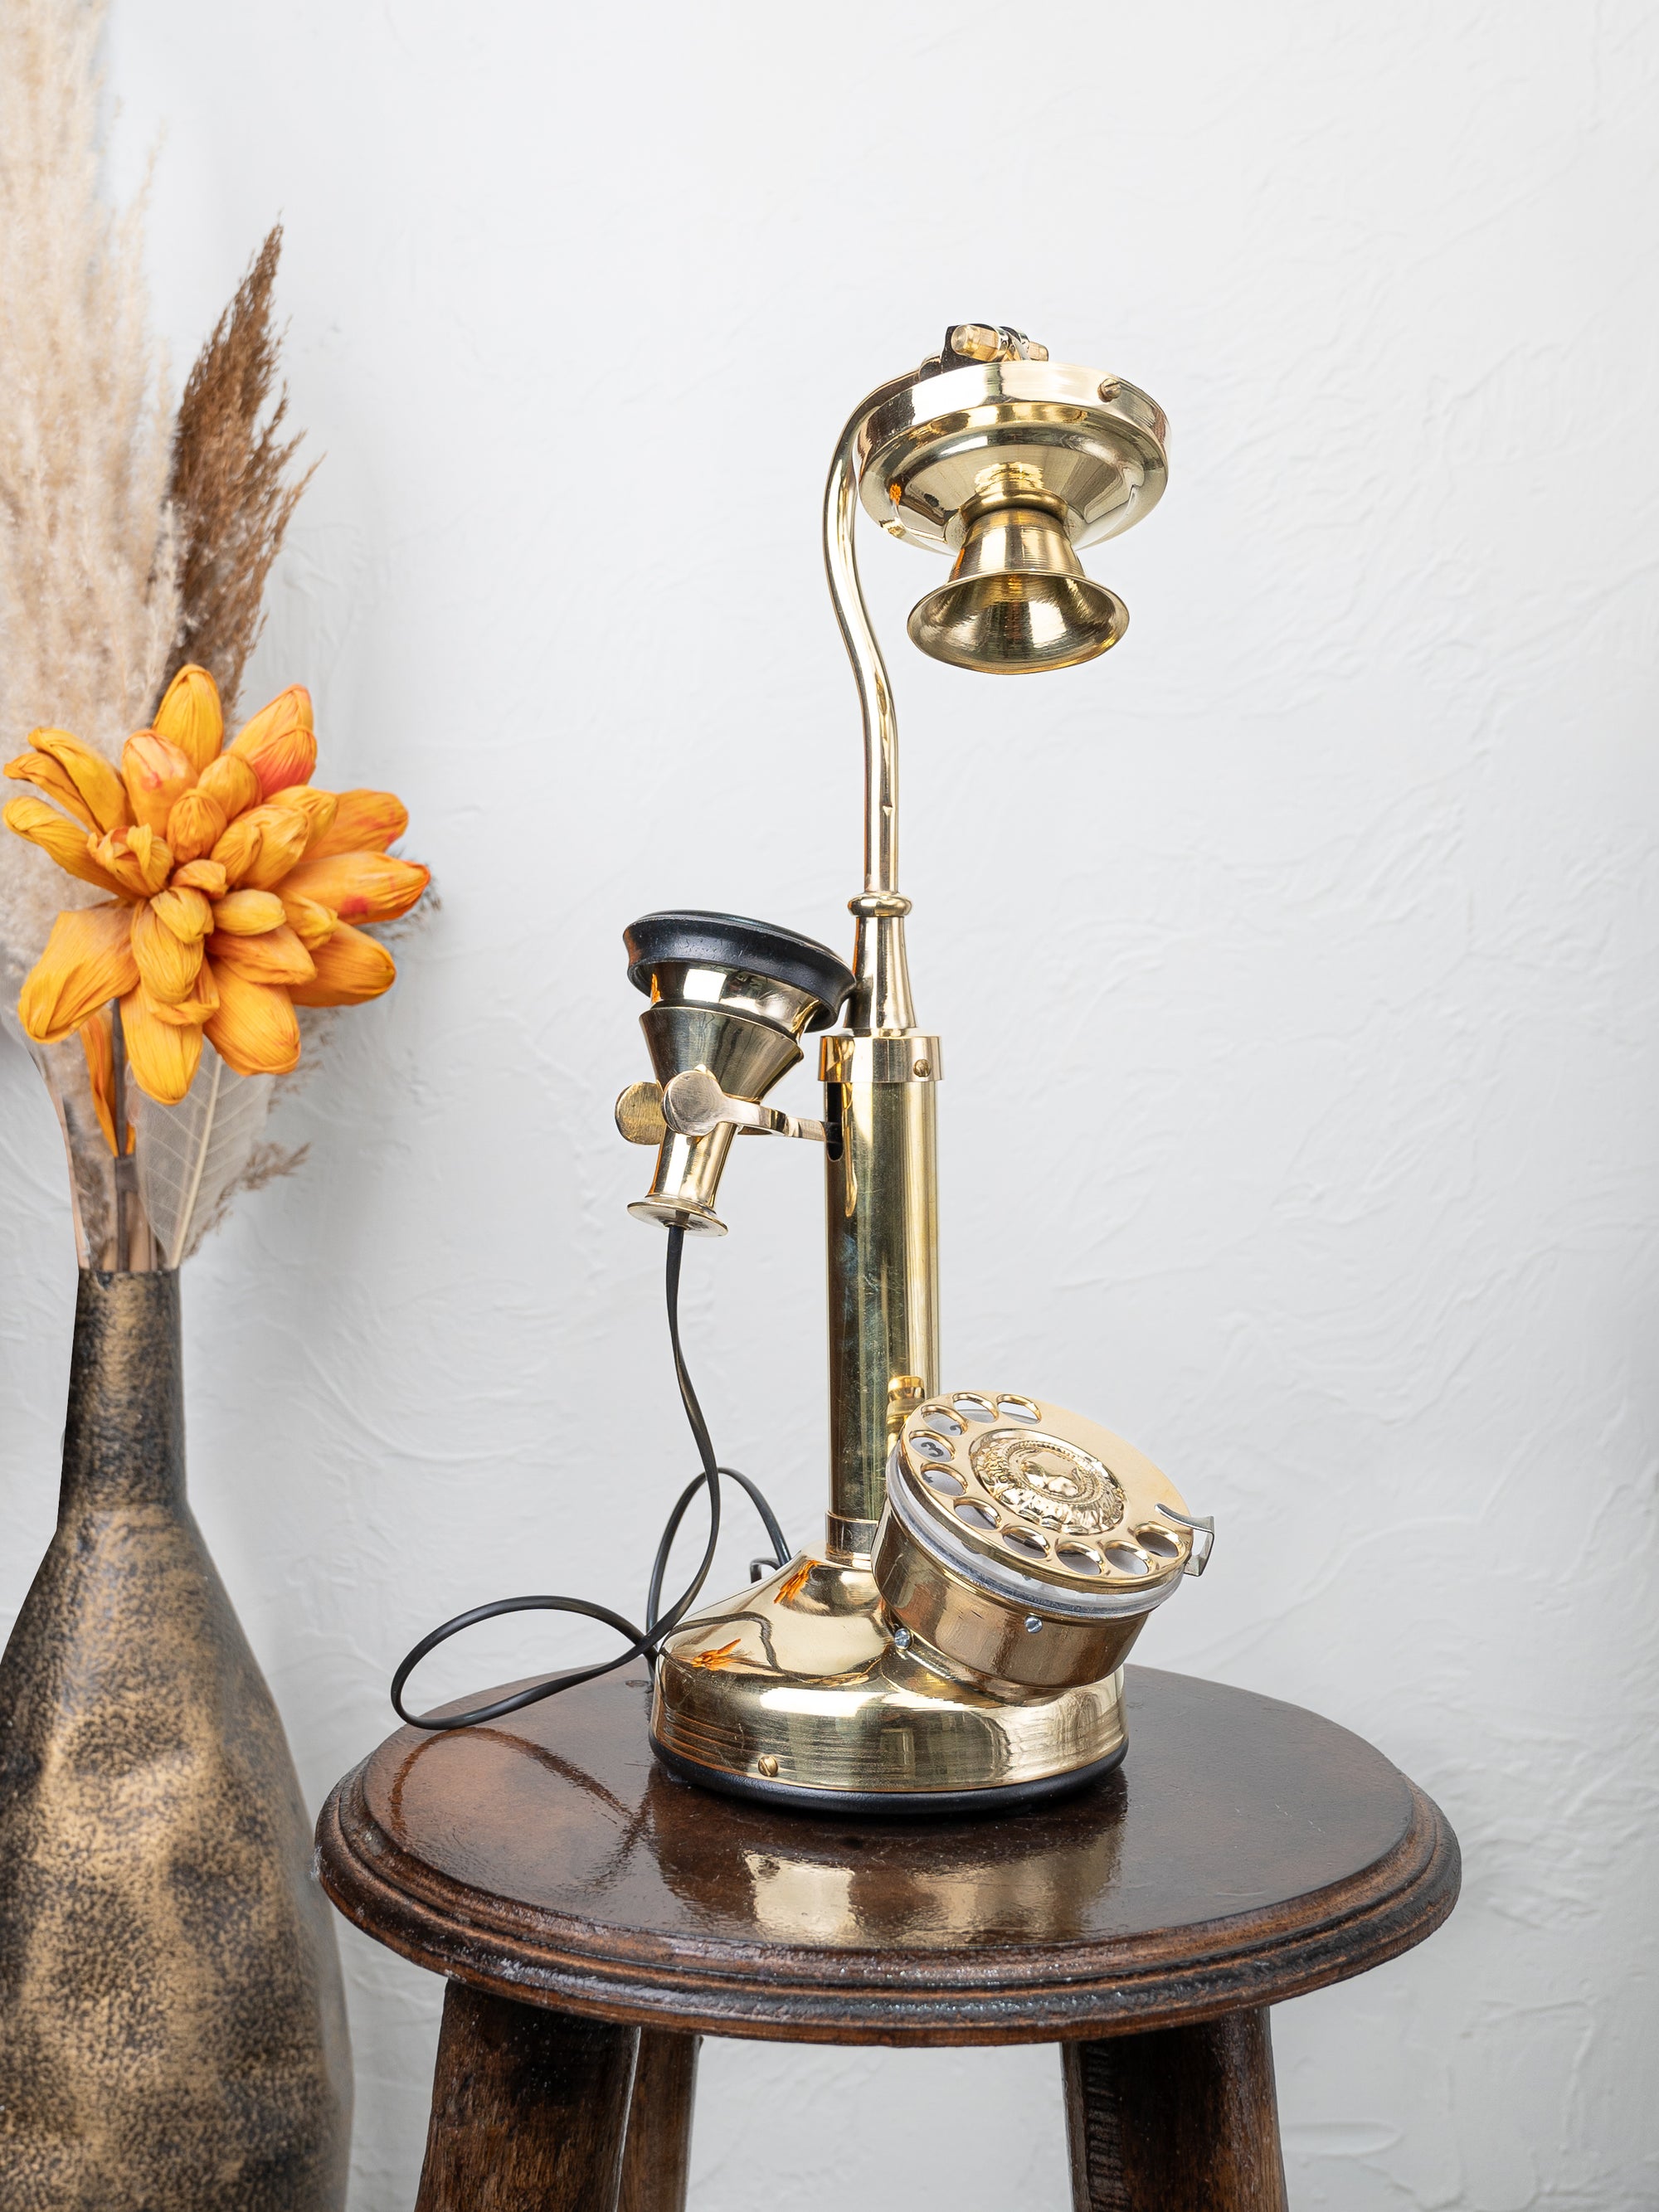 Brass Crafted Vintage Candle type Rotary Dial Phone for Home Decor